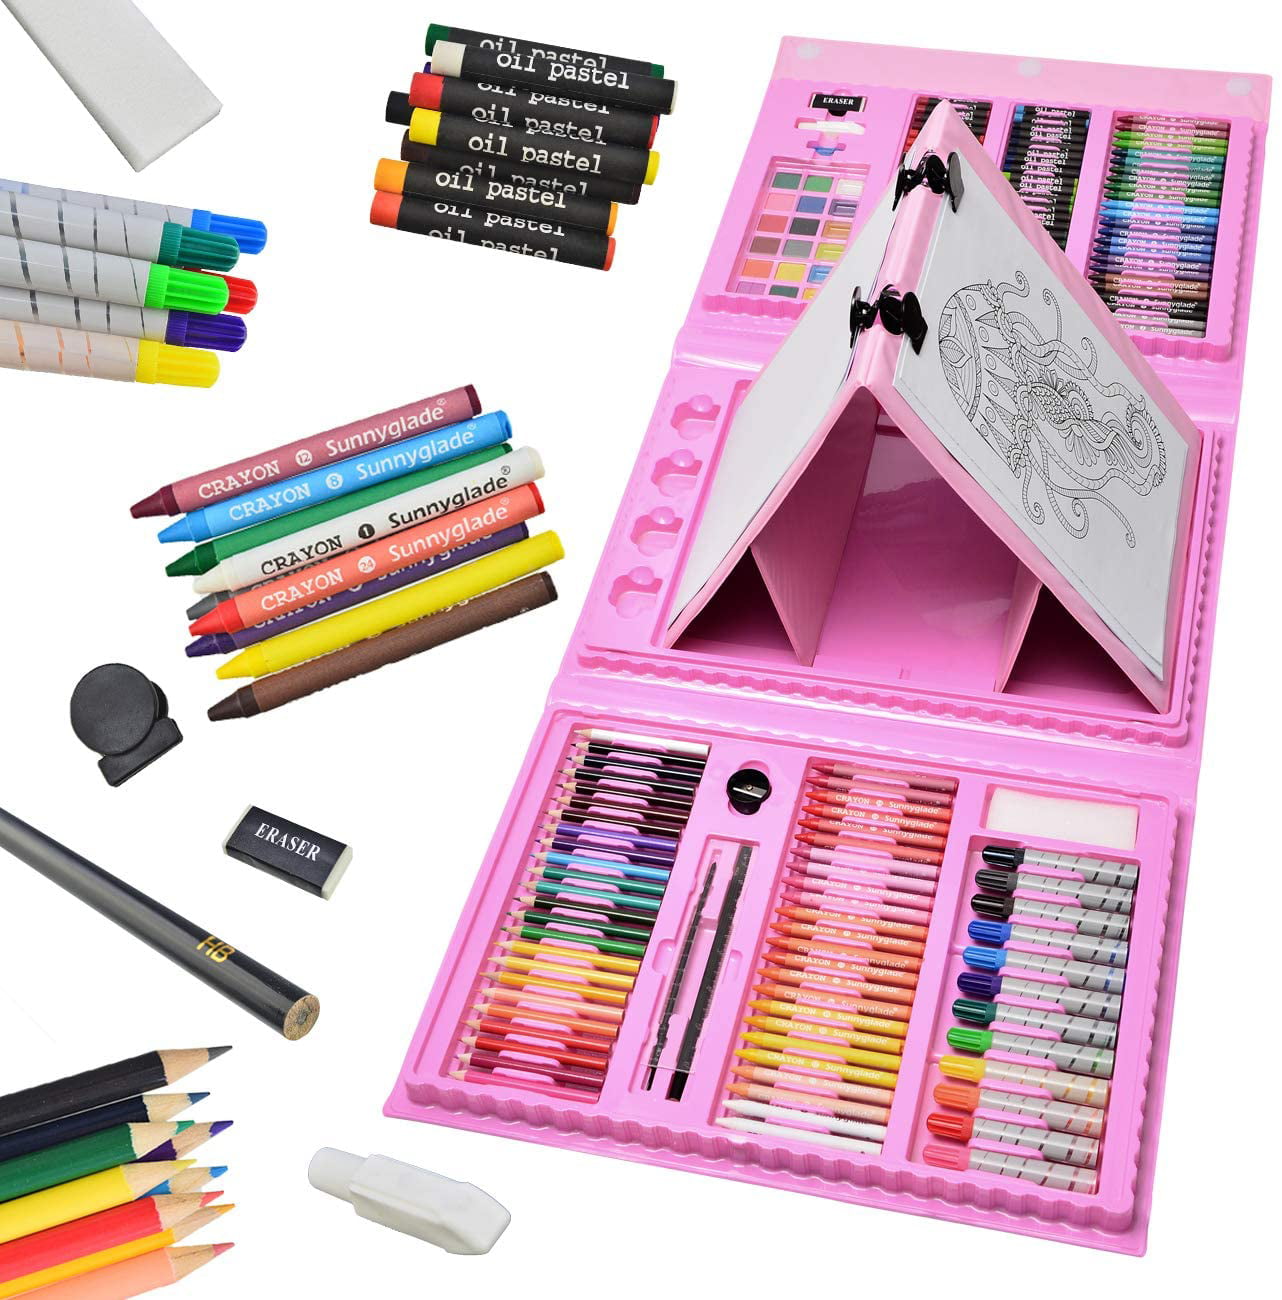 2 × Crayola Doodle Magic Tabletop Double Sided Easel & 4 Coloured Markers •OFFER 